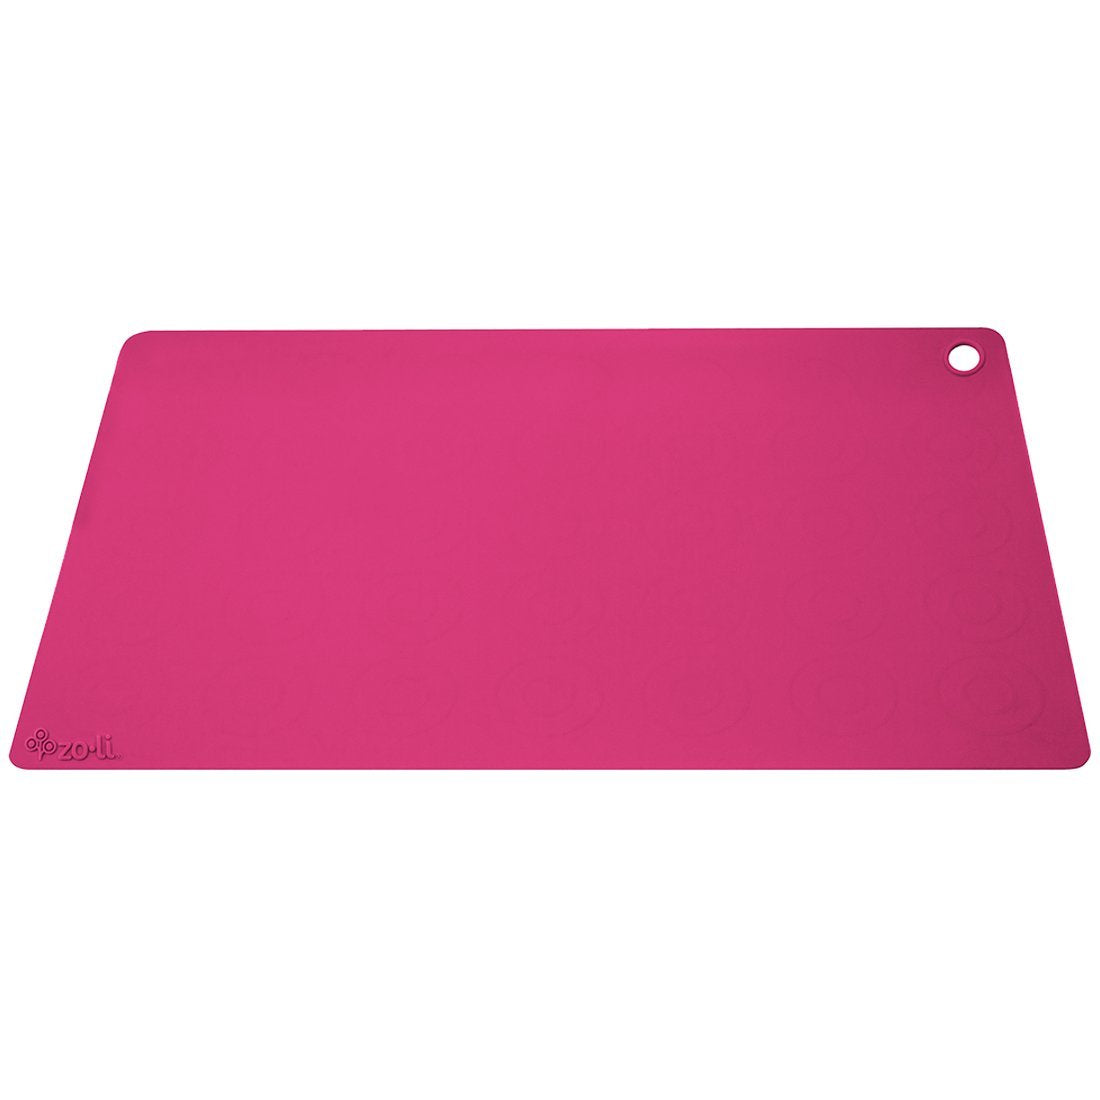 Reusable Silicone Placemats for Kids